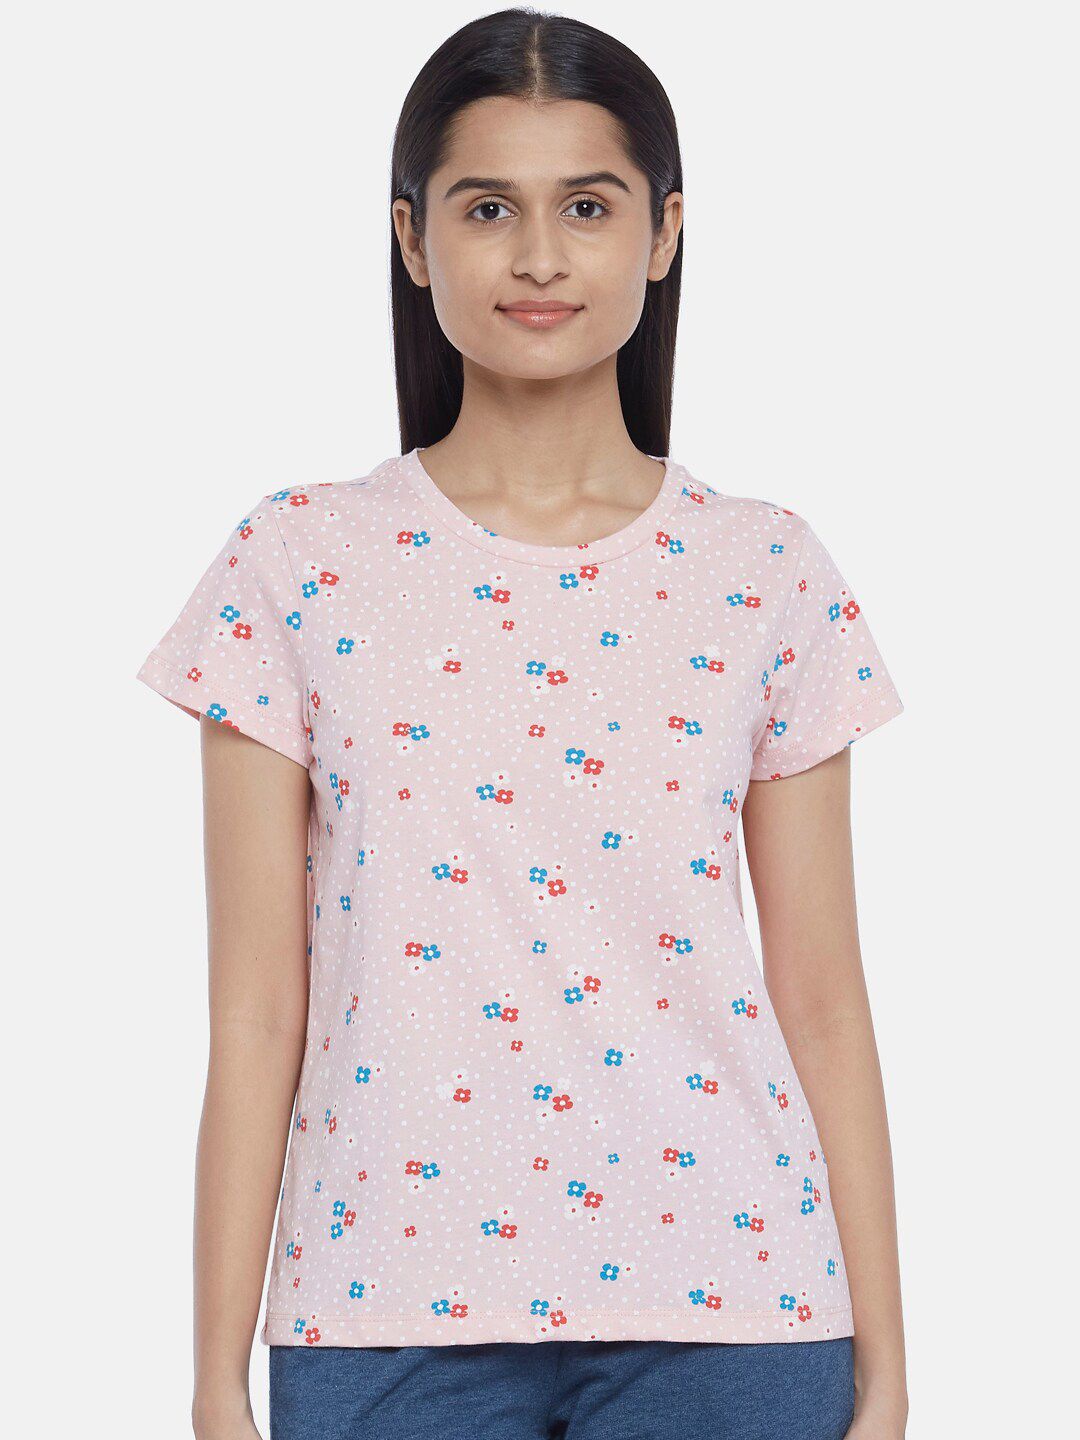 Dreamz by Pantaloons Women Pink Floral Lounge Tshirt Price in India